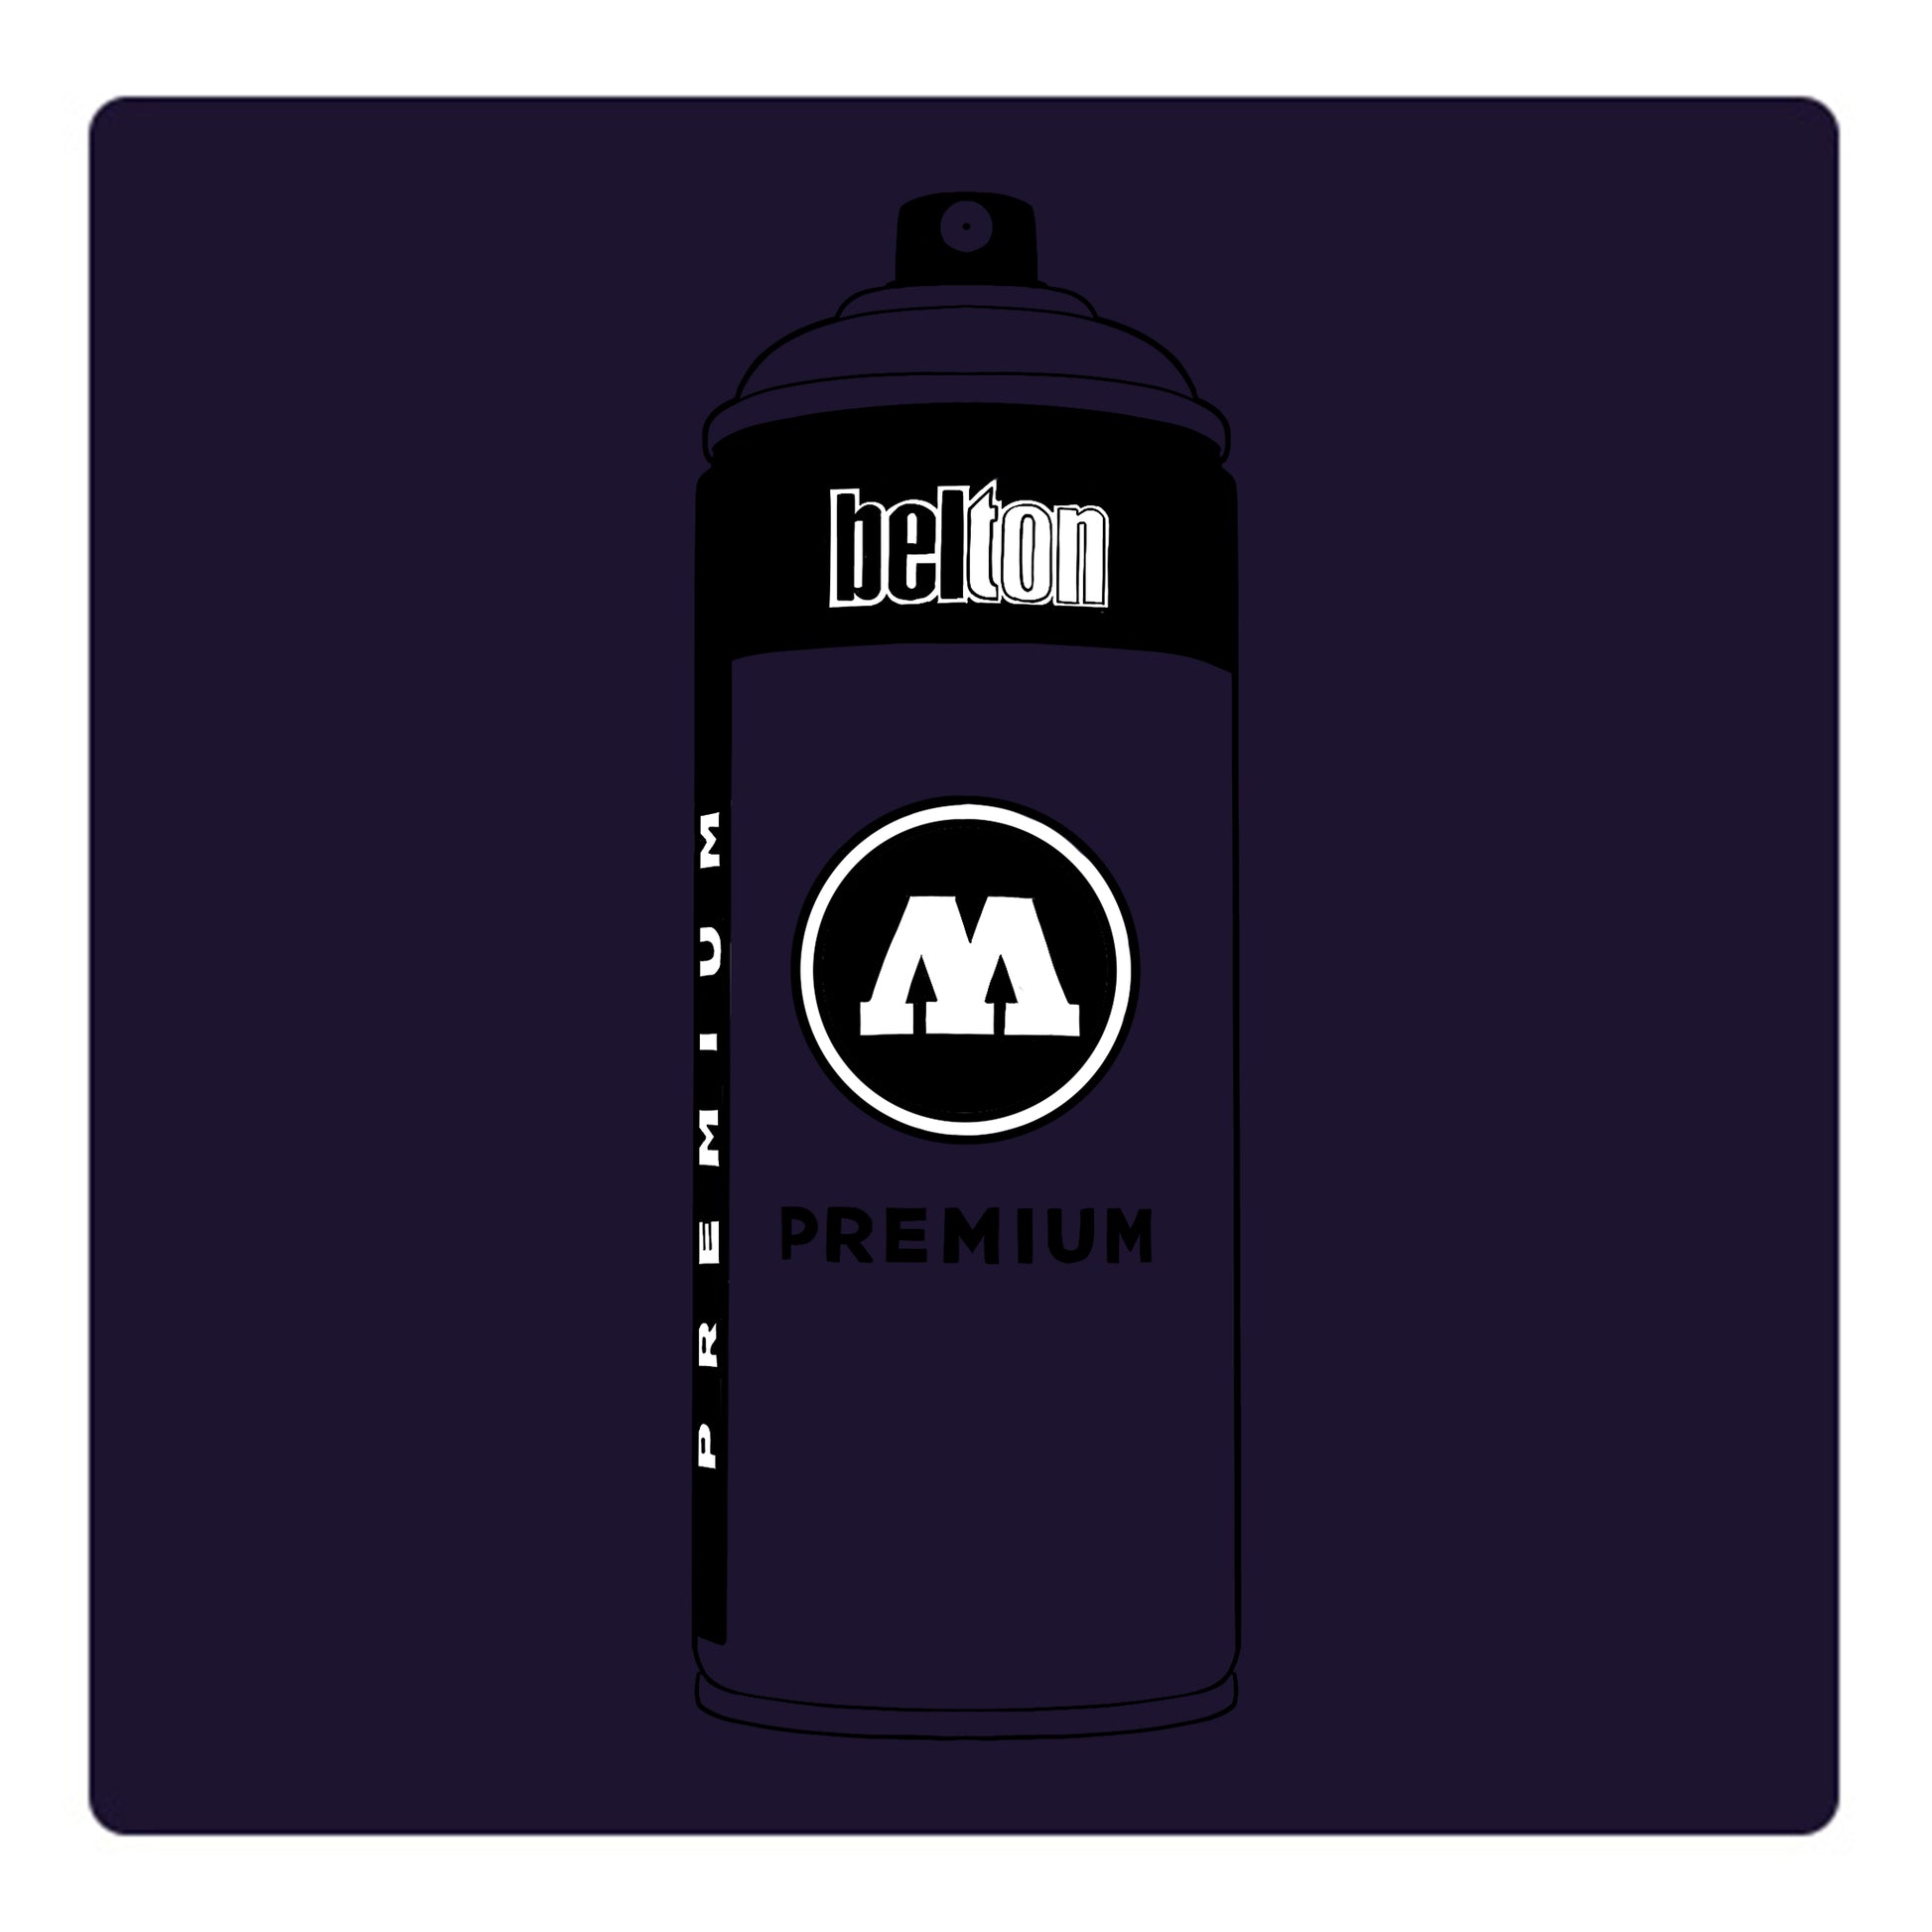 A black outline drawing of a dark purple spray paint can with the words "belton","premium" and the letter"M" written on the face in black and white font. The background is a color swatch of the same dark purple with a white border.